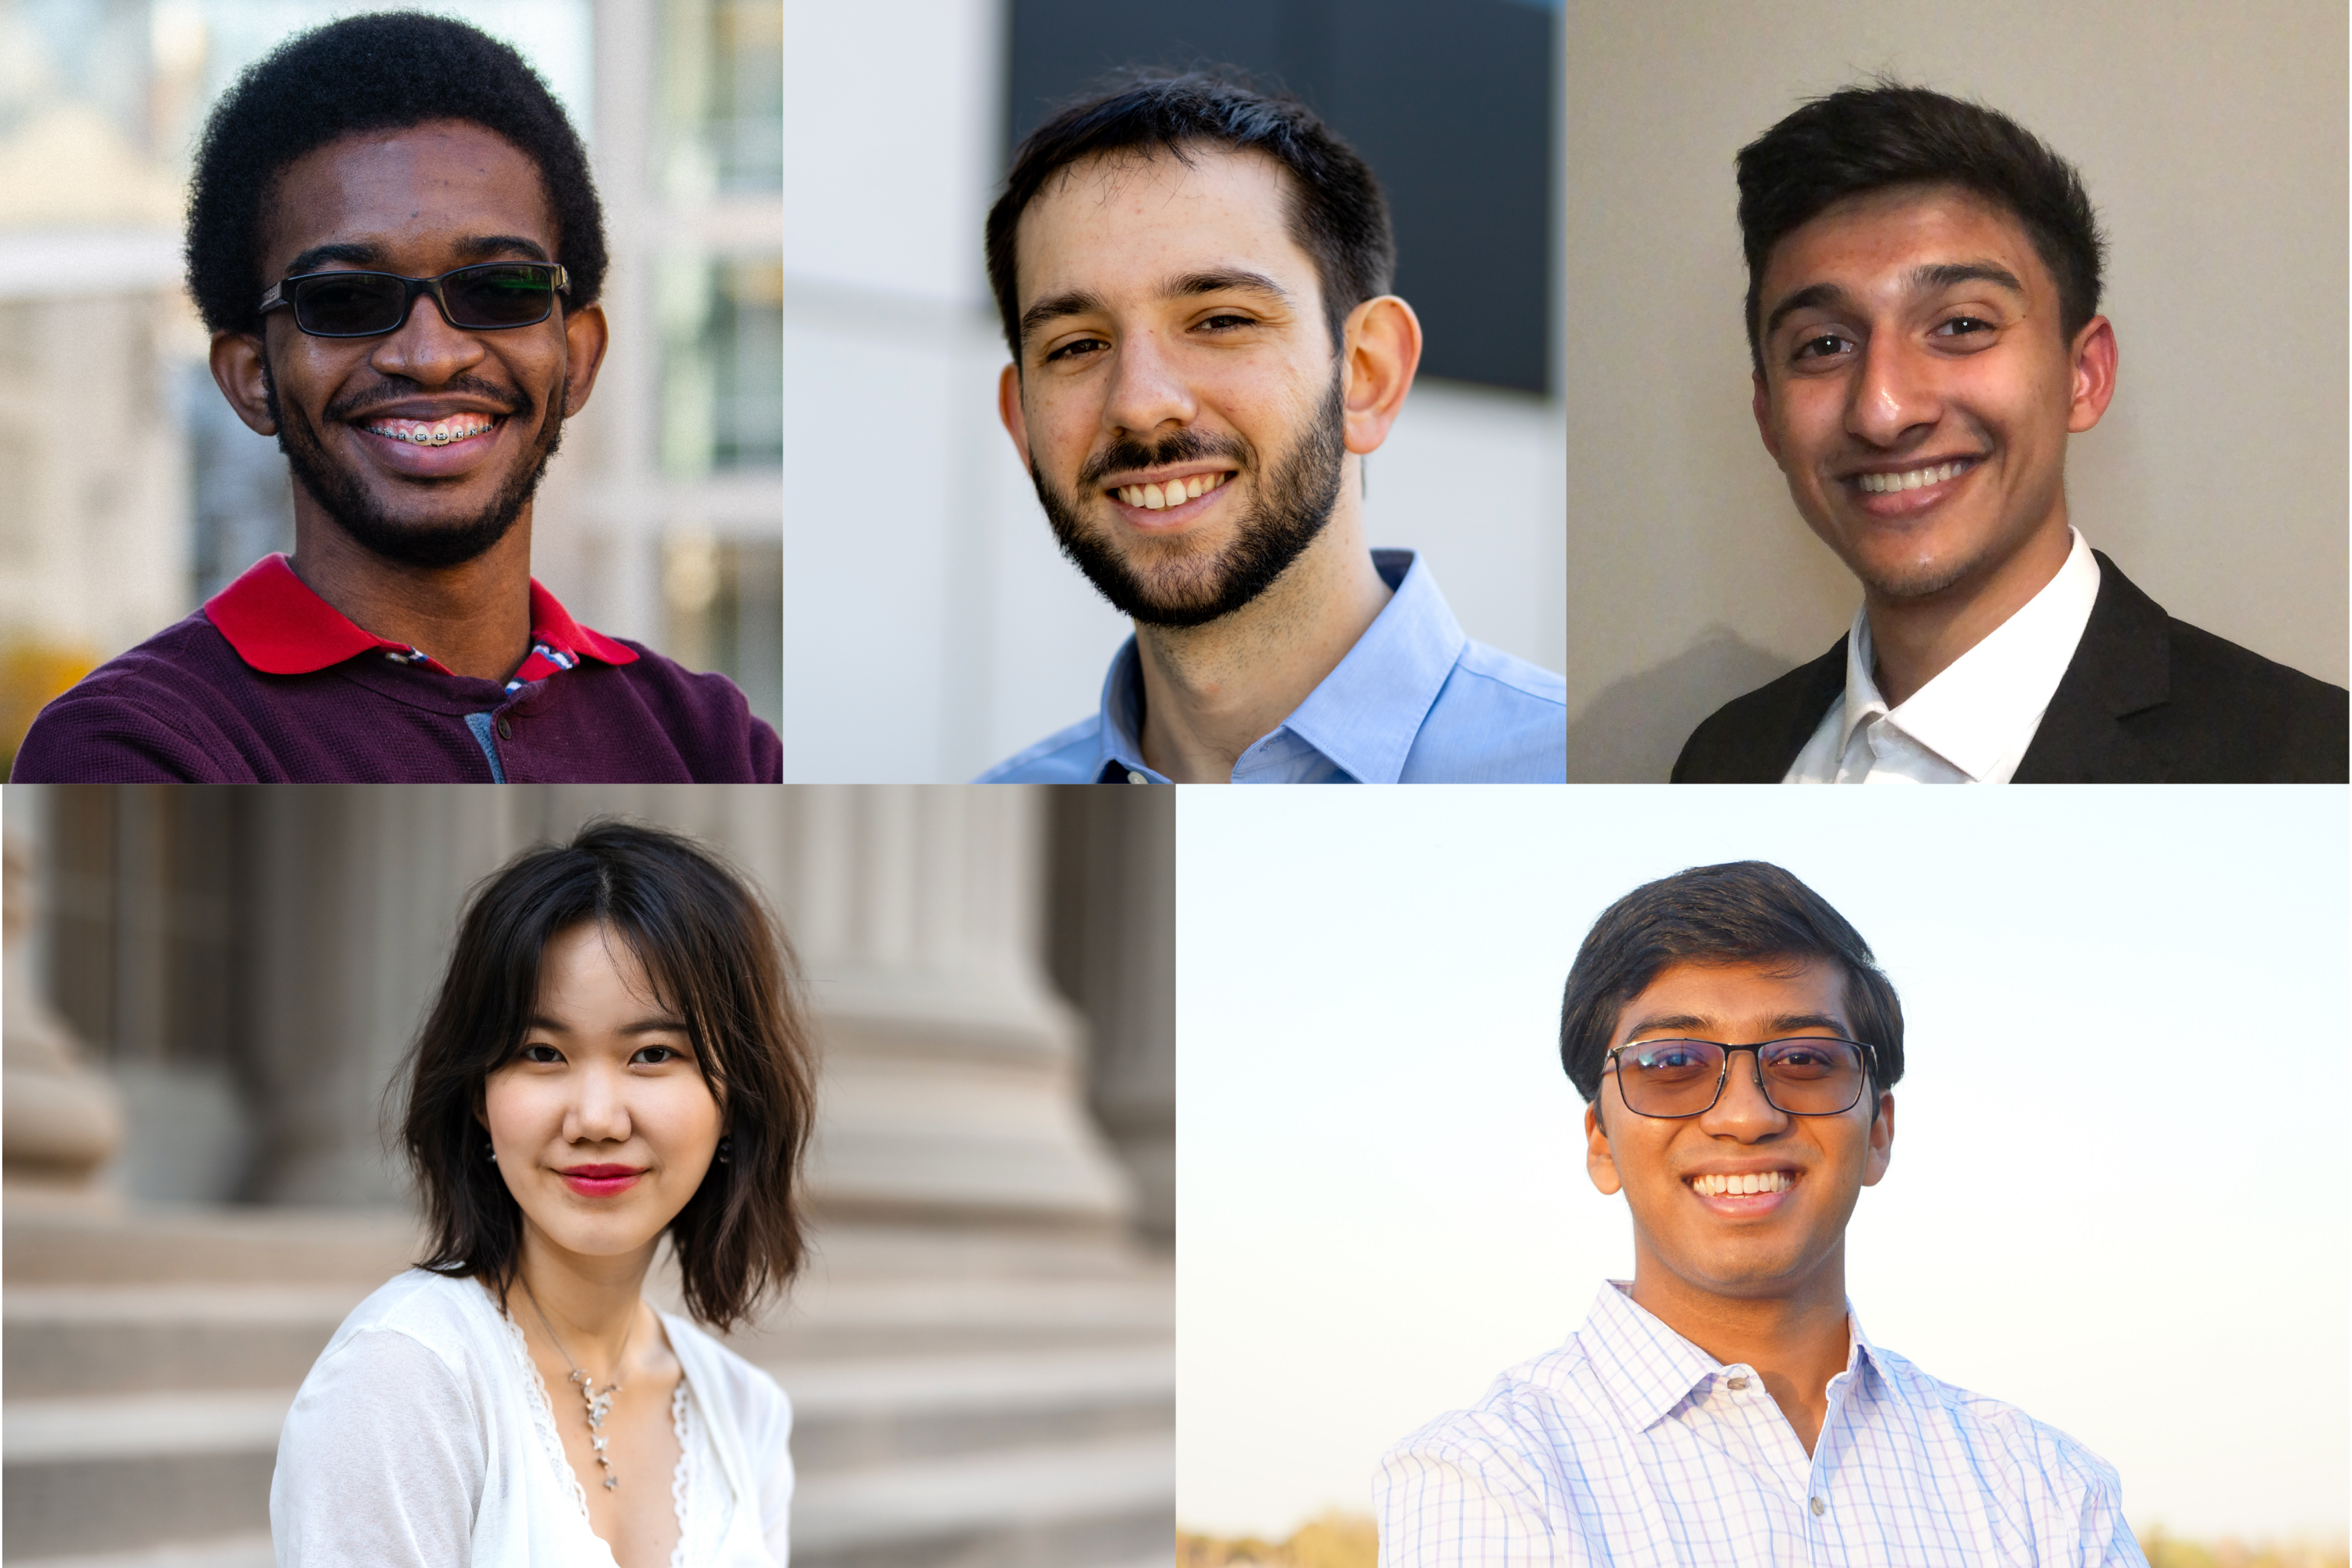 The 2022 Knight-Hennessy Scholars include (top row, left to right) Desmond Edwards, Tomás Guarna, Pranav Lalgudi, (bottom row, left to right) Michelle Lee, and Syamantak Payra. Not shown: Jessica Karaguesian